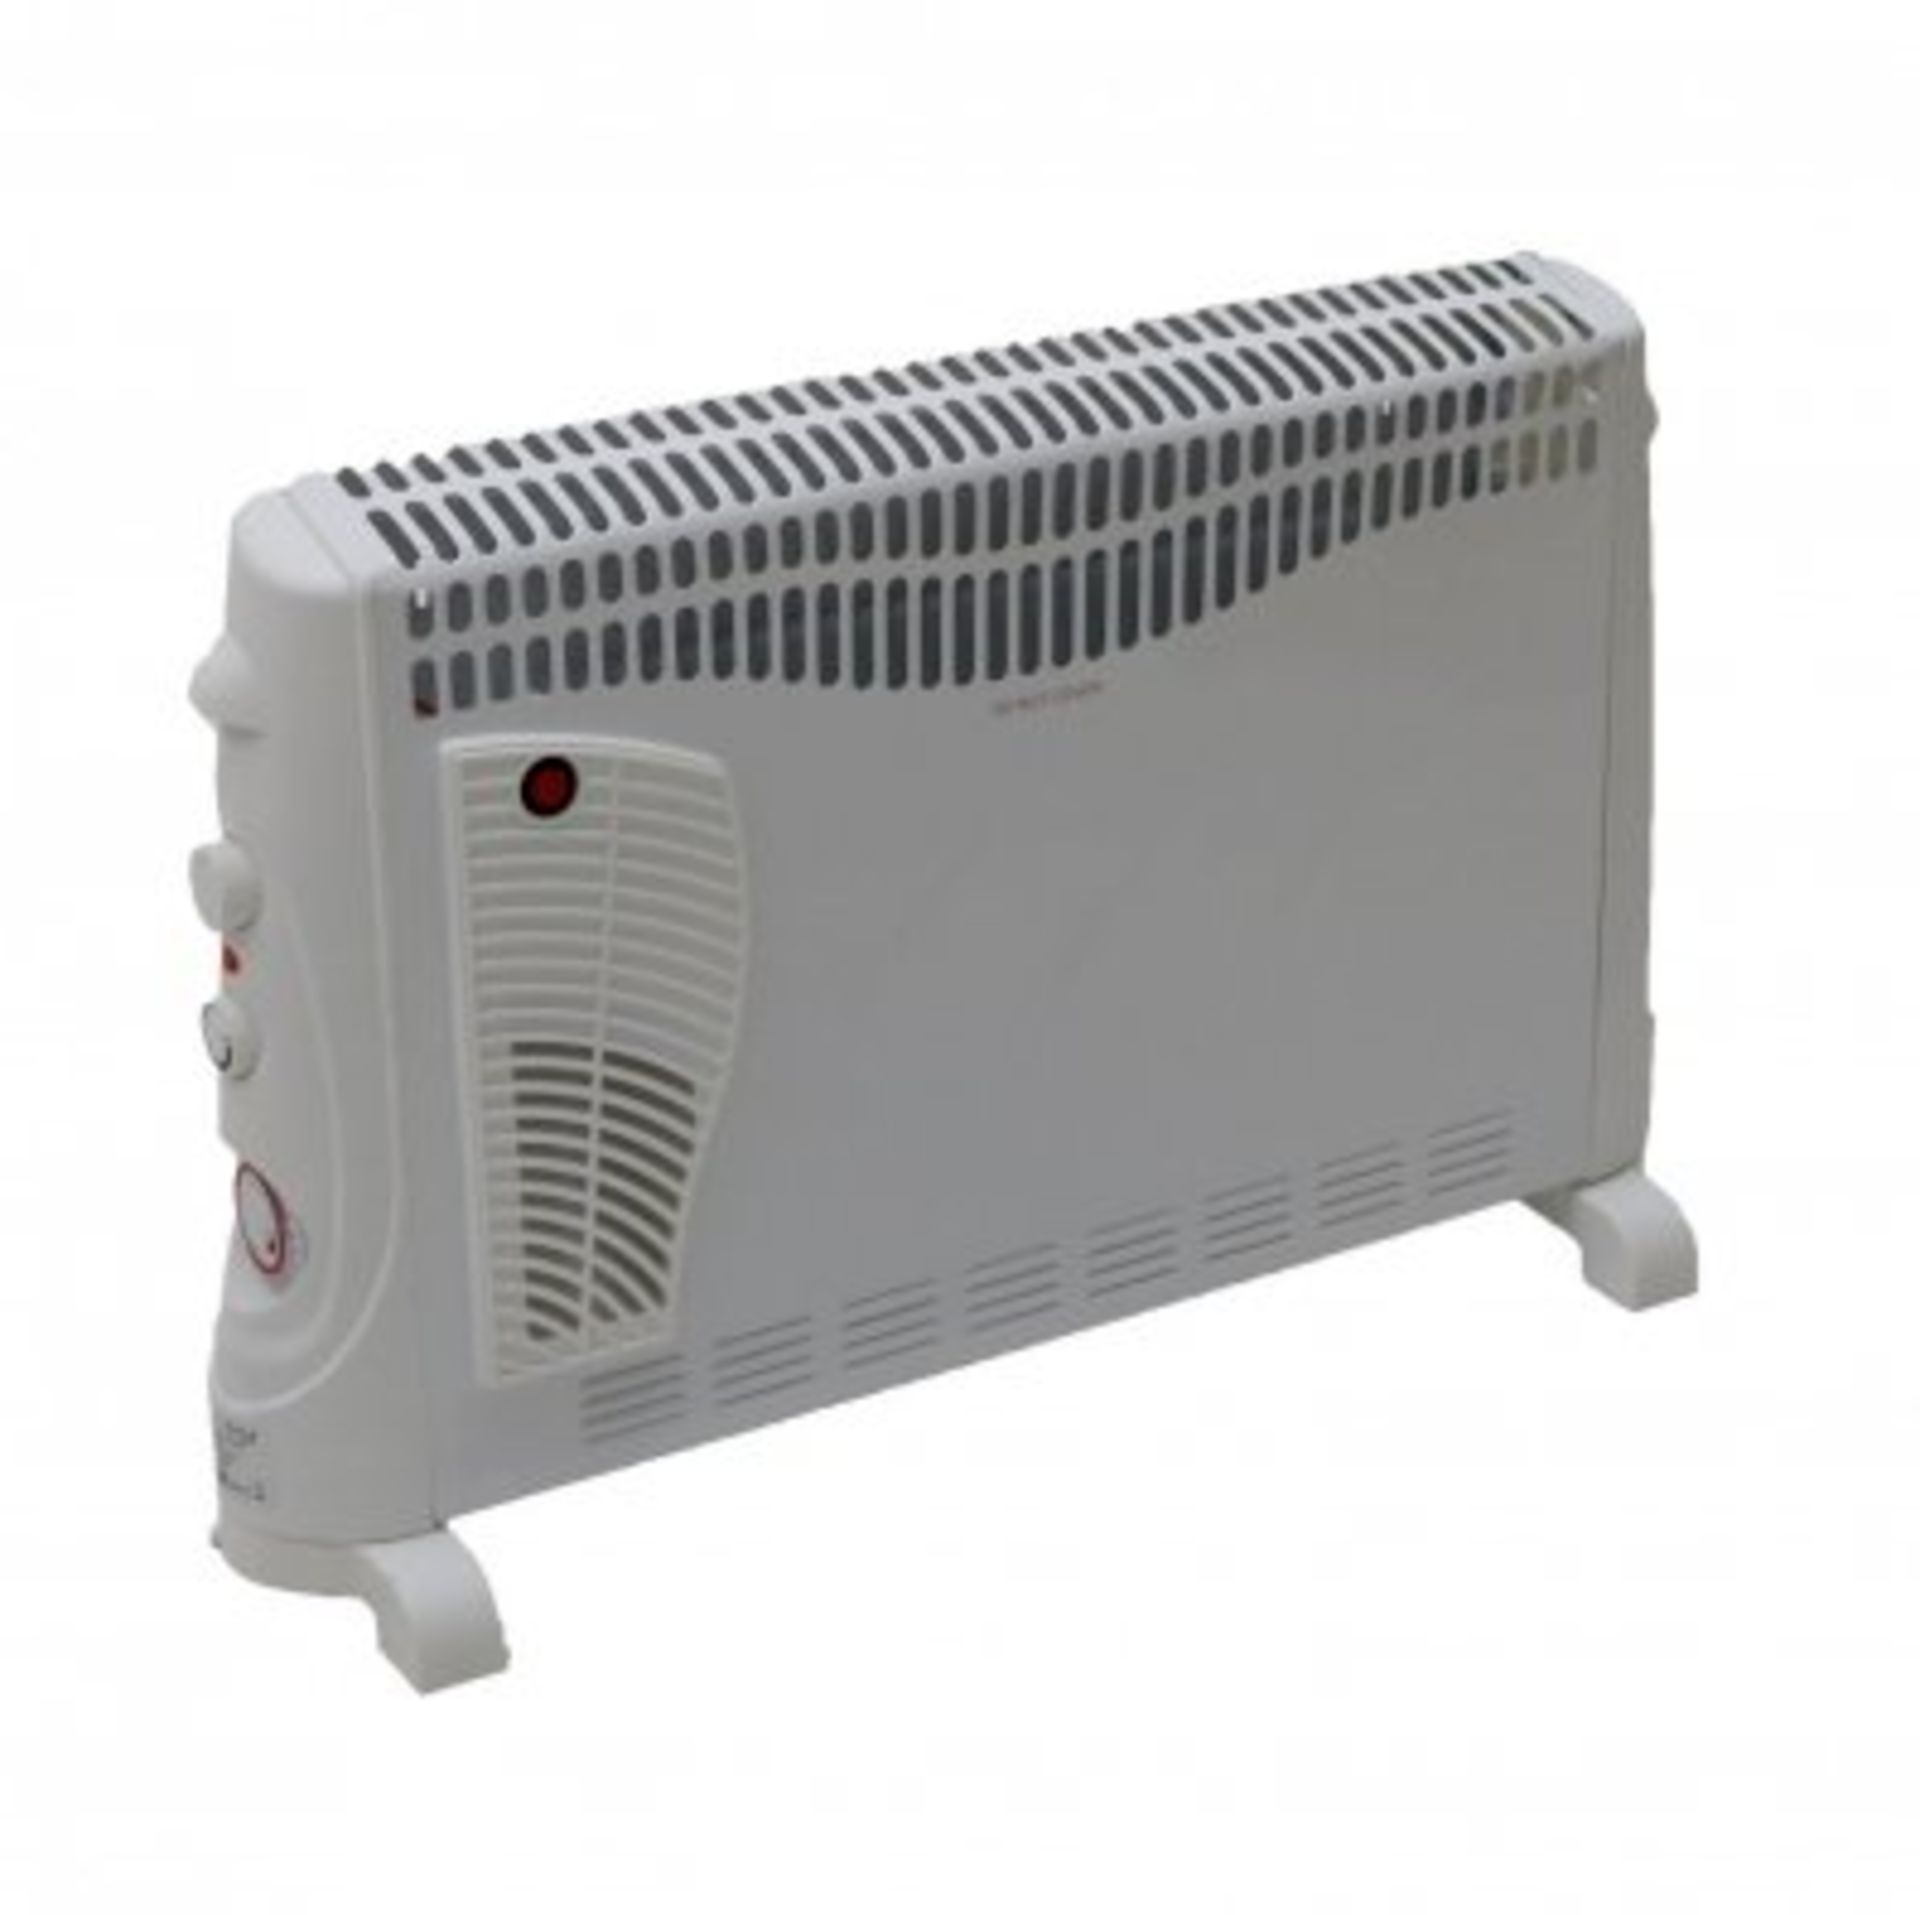 (LF83) 2kW Convector Heater - 3 Heat Settings, Turbo and Timer Stay warm this year with the ...